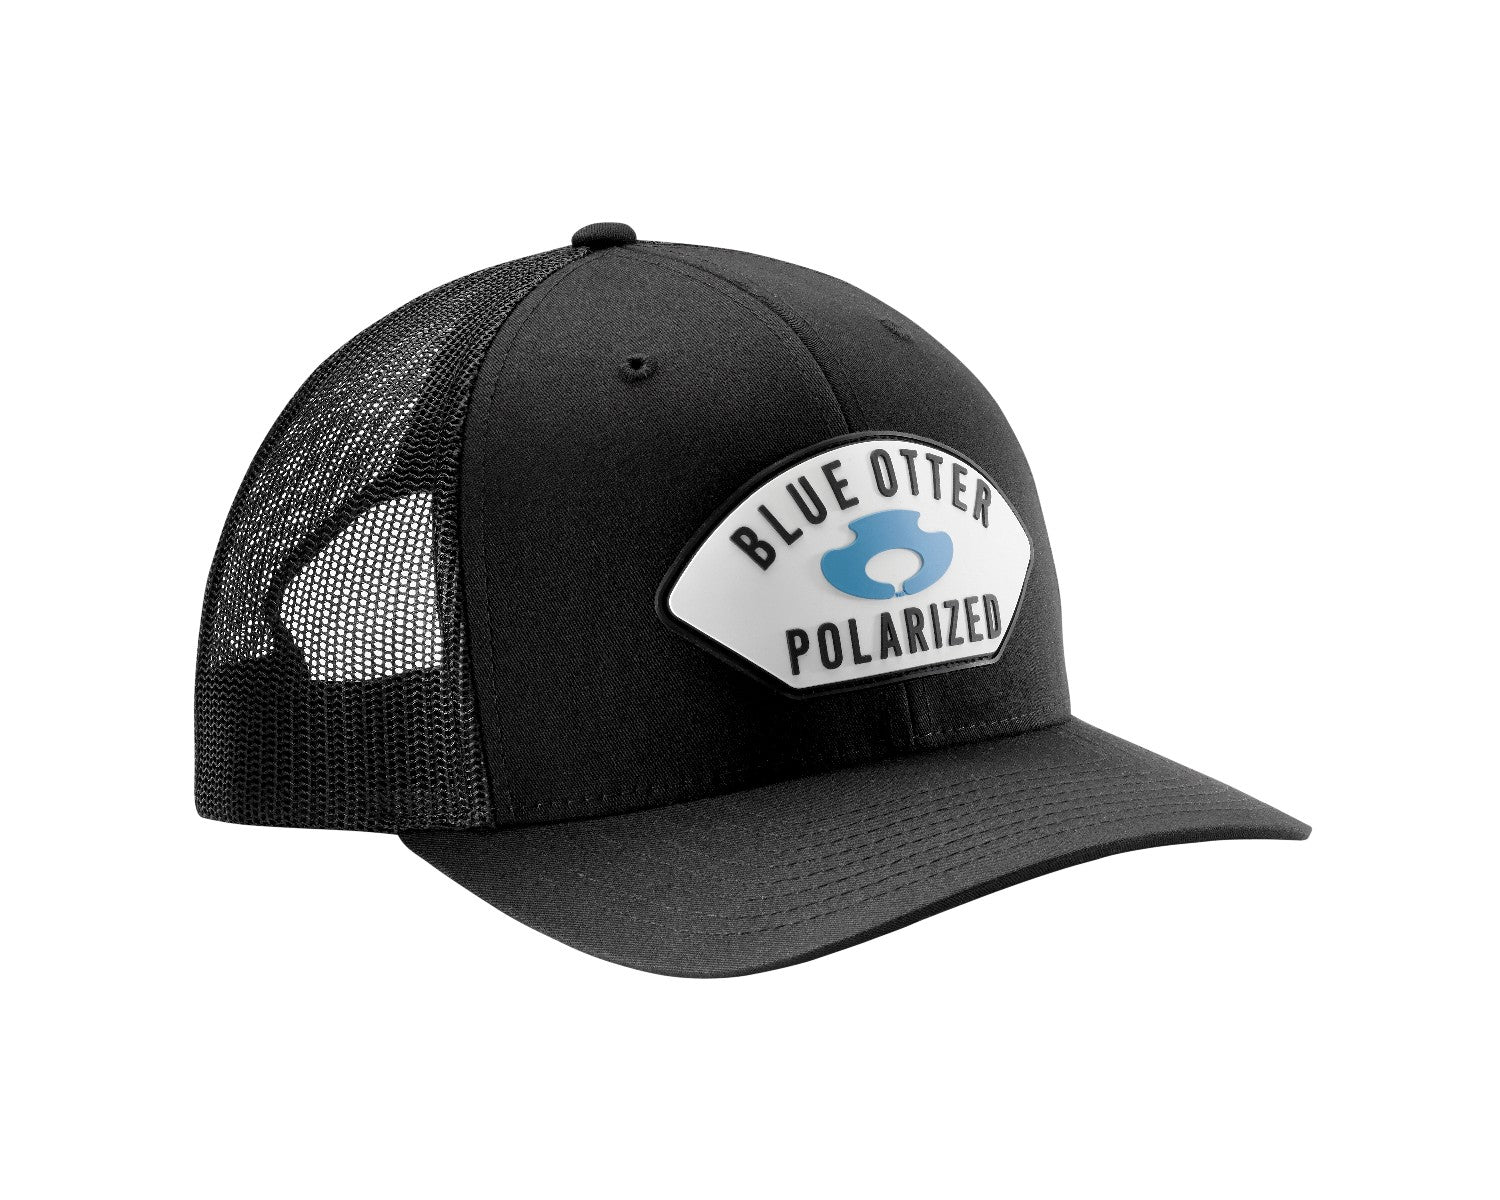 Main Stage Black Mesh White Patch Hat